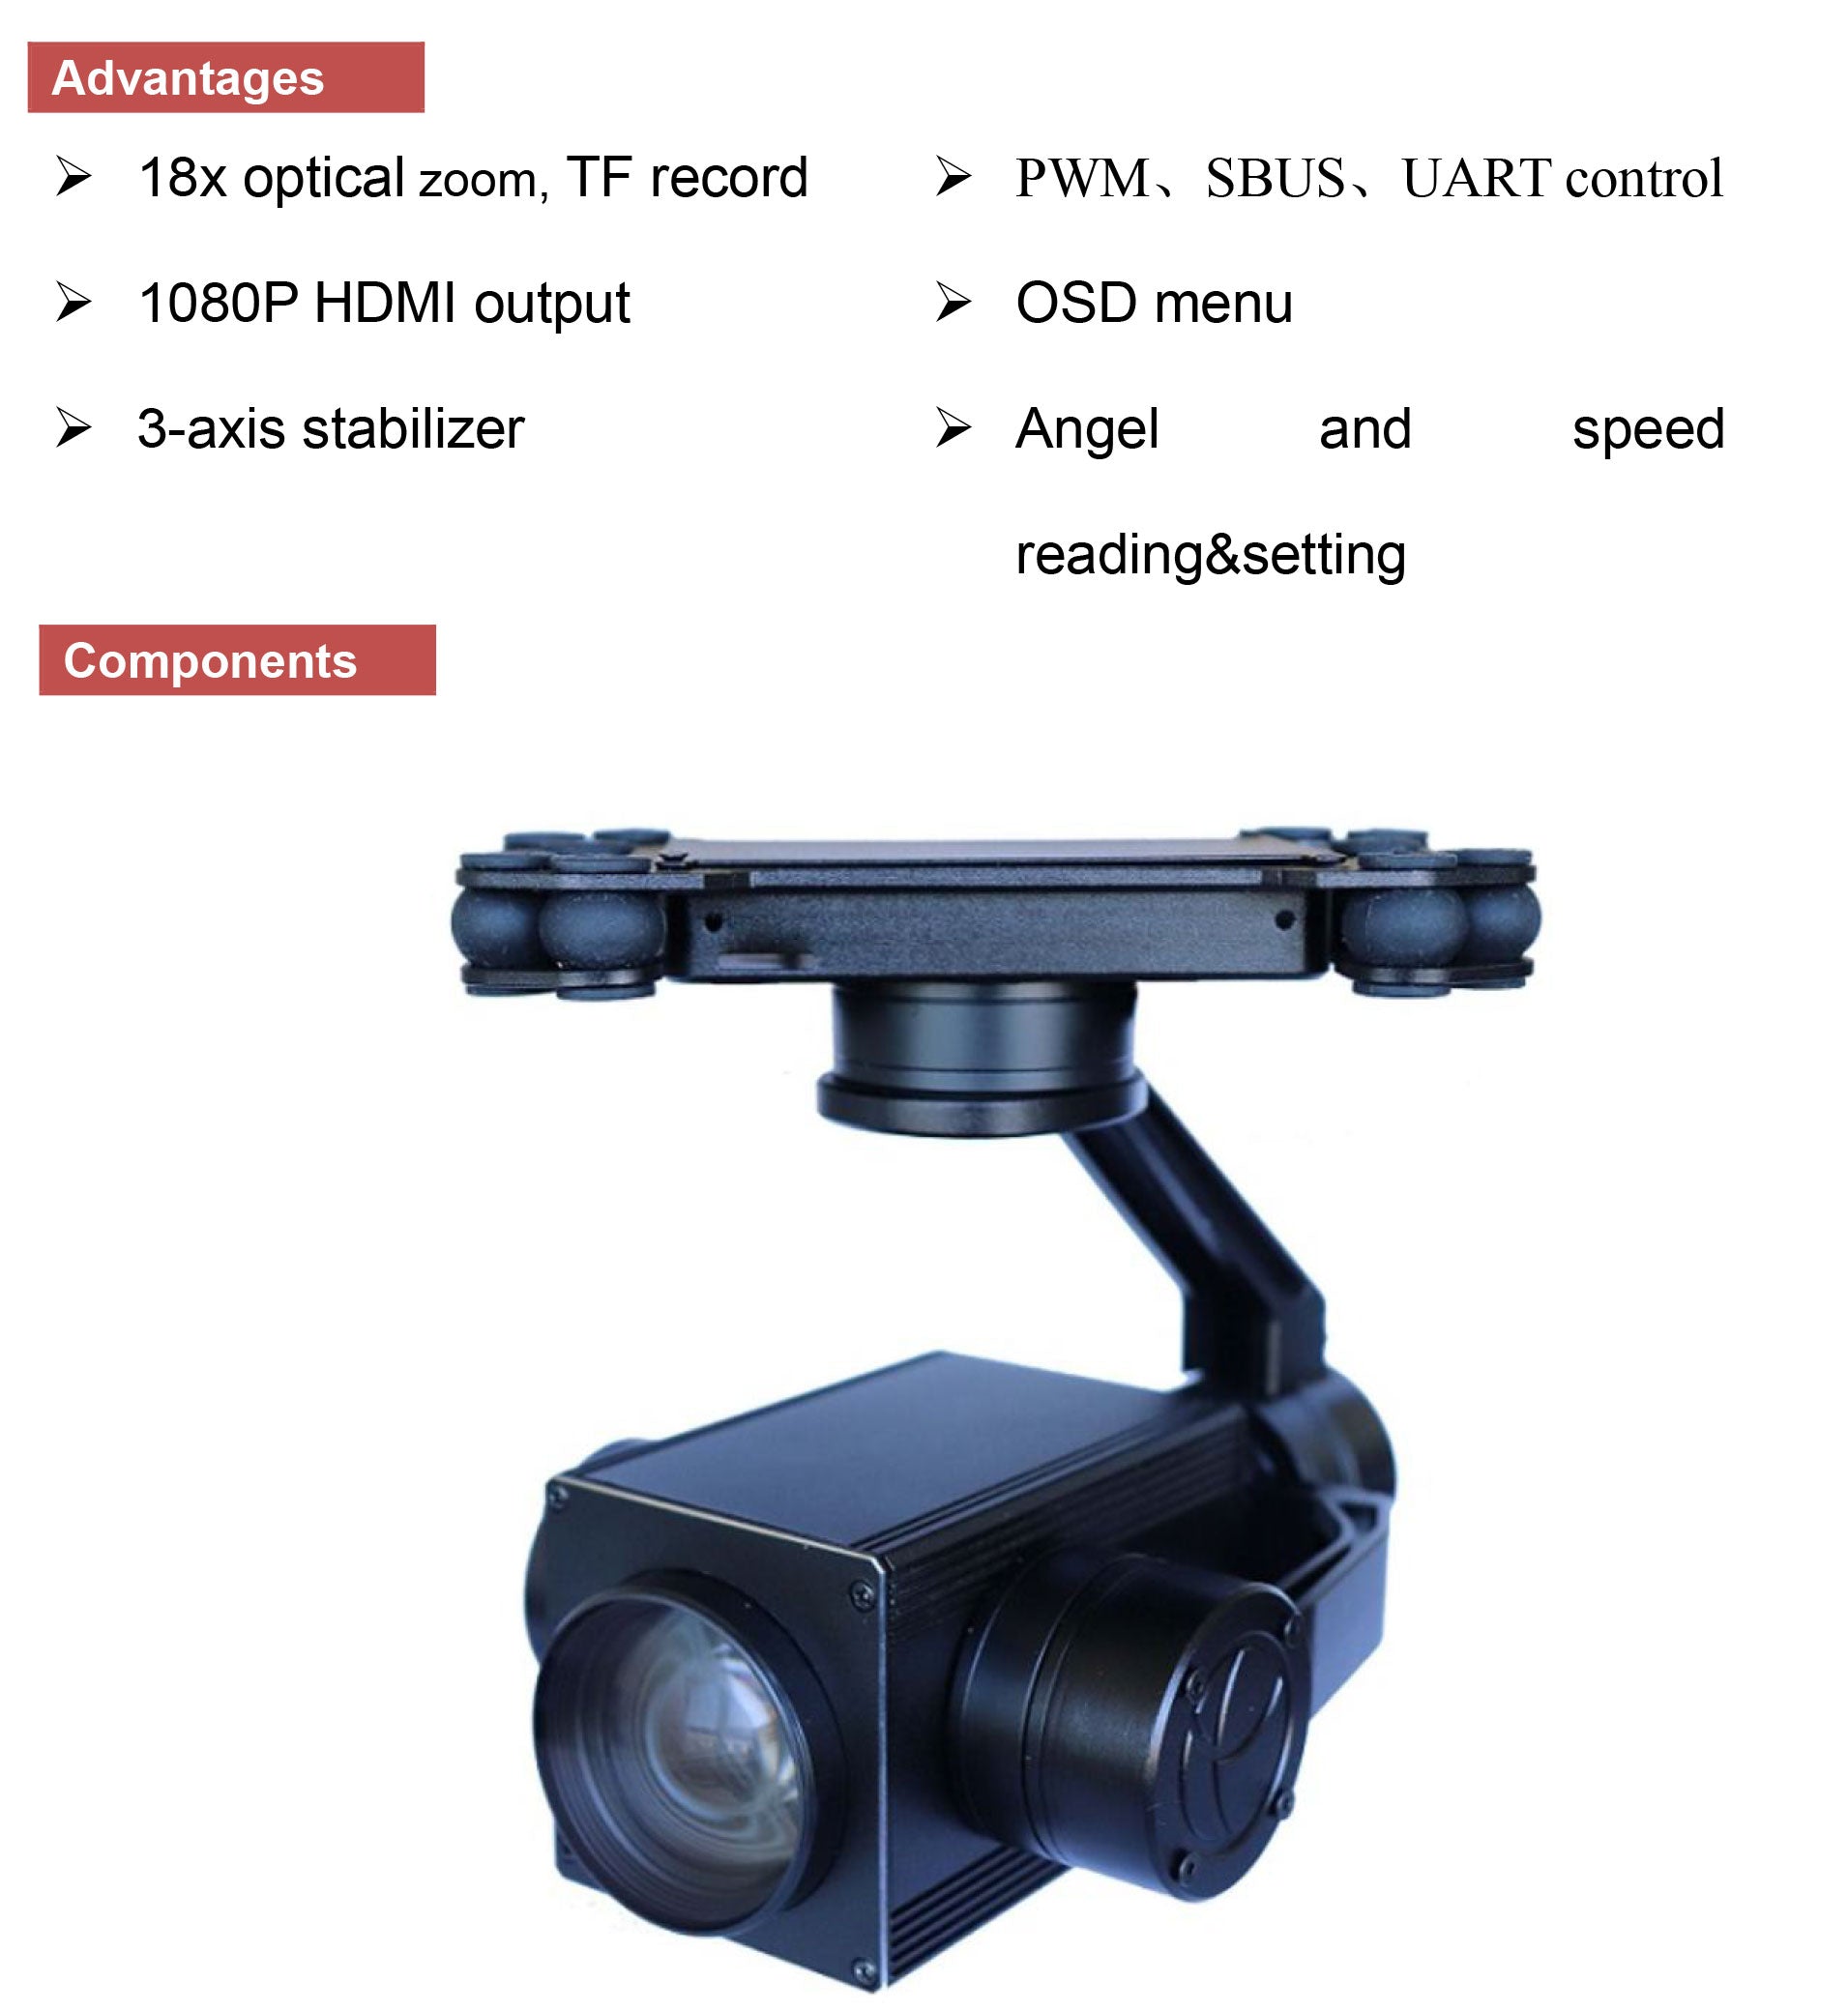 TOPOTEK TP18 Drone Camer Gimbal, Advanced drone camera features: 18x optical zoom, recording, controls, and stabilization.